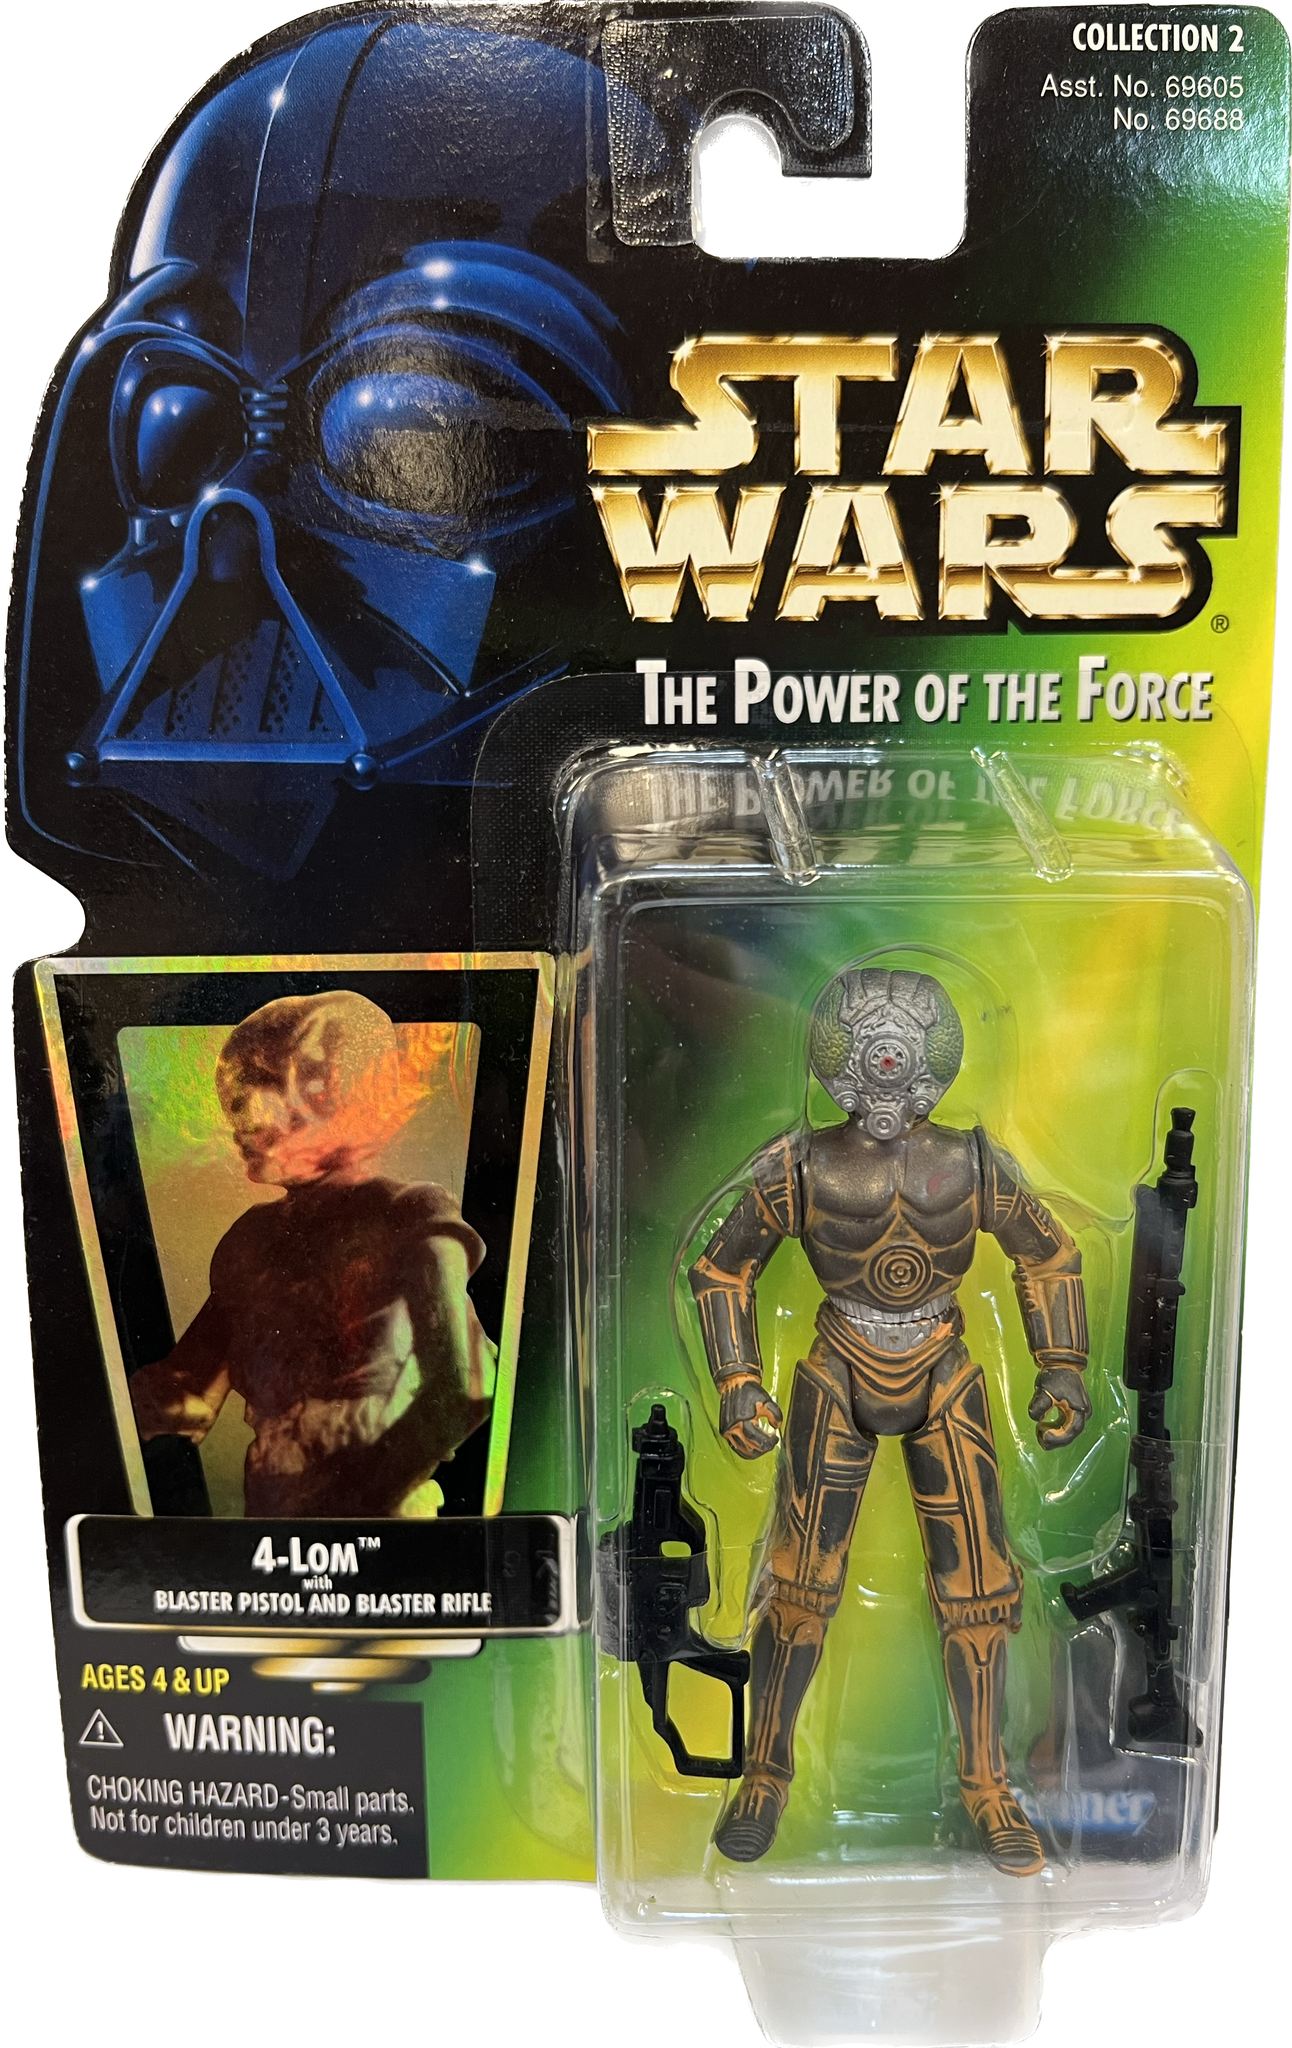 Star Wars Power of the Force 4-Lom